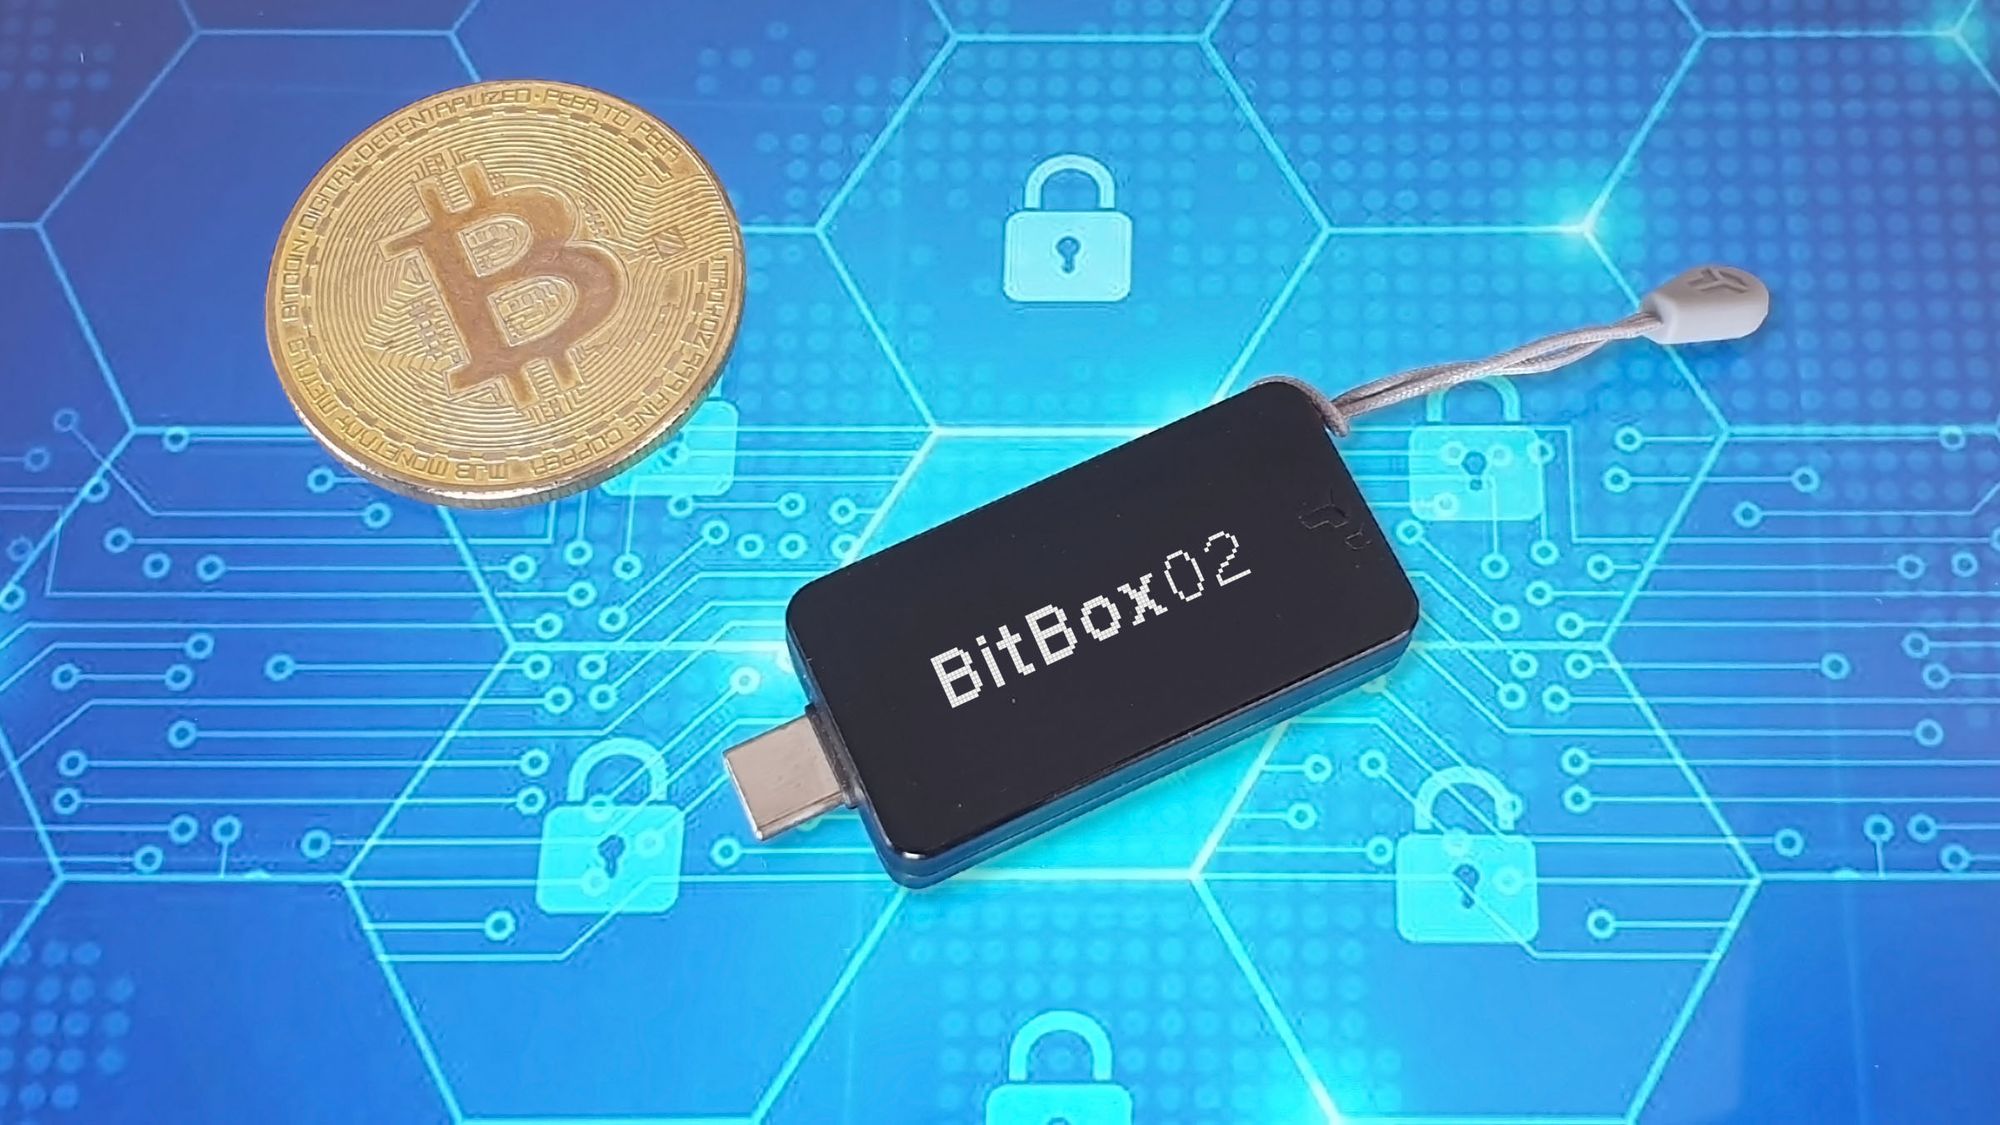 5 questions about Bitcoin hardware wallet security you’ve always wanted to ask